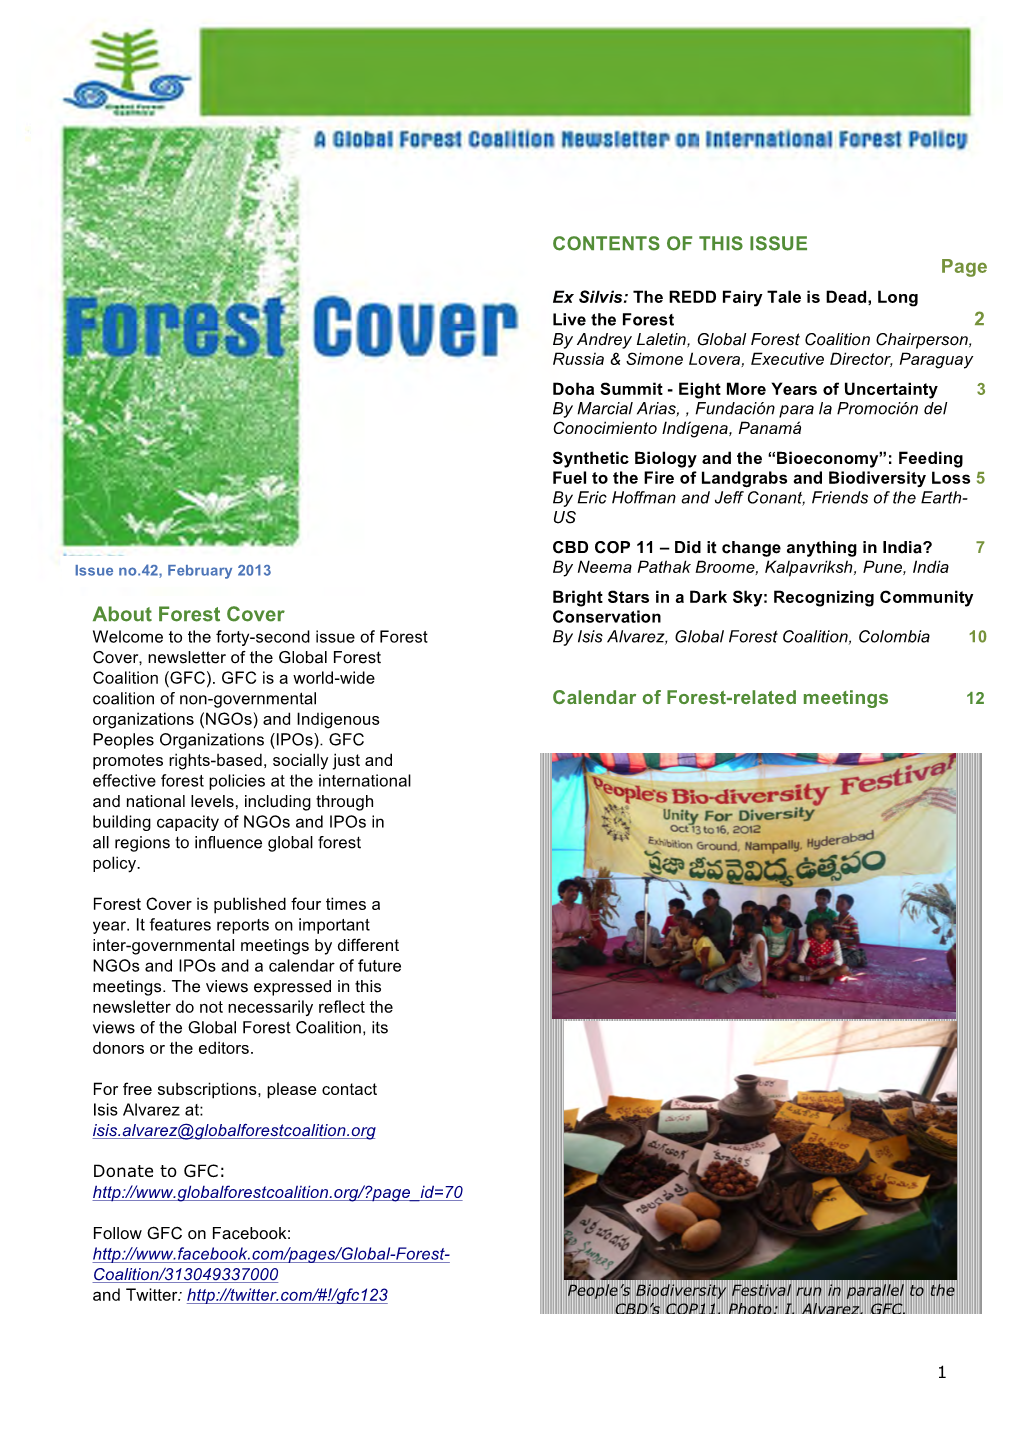 About Forest Cover